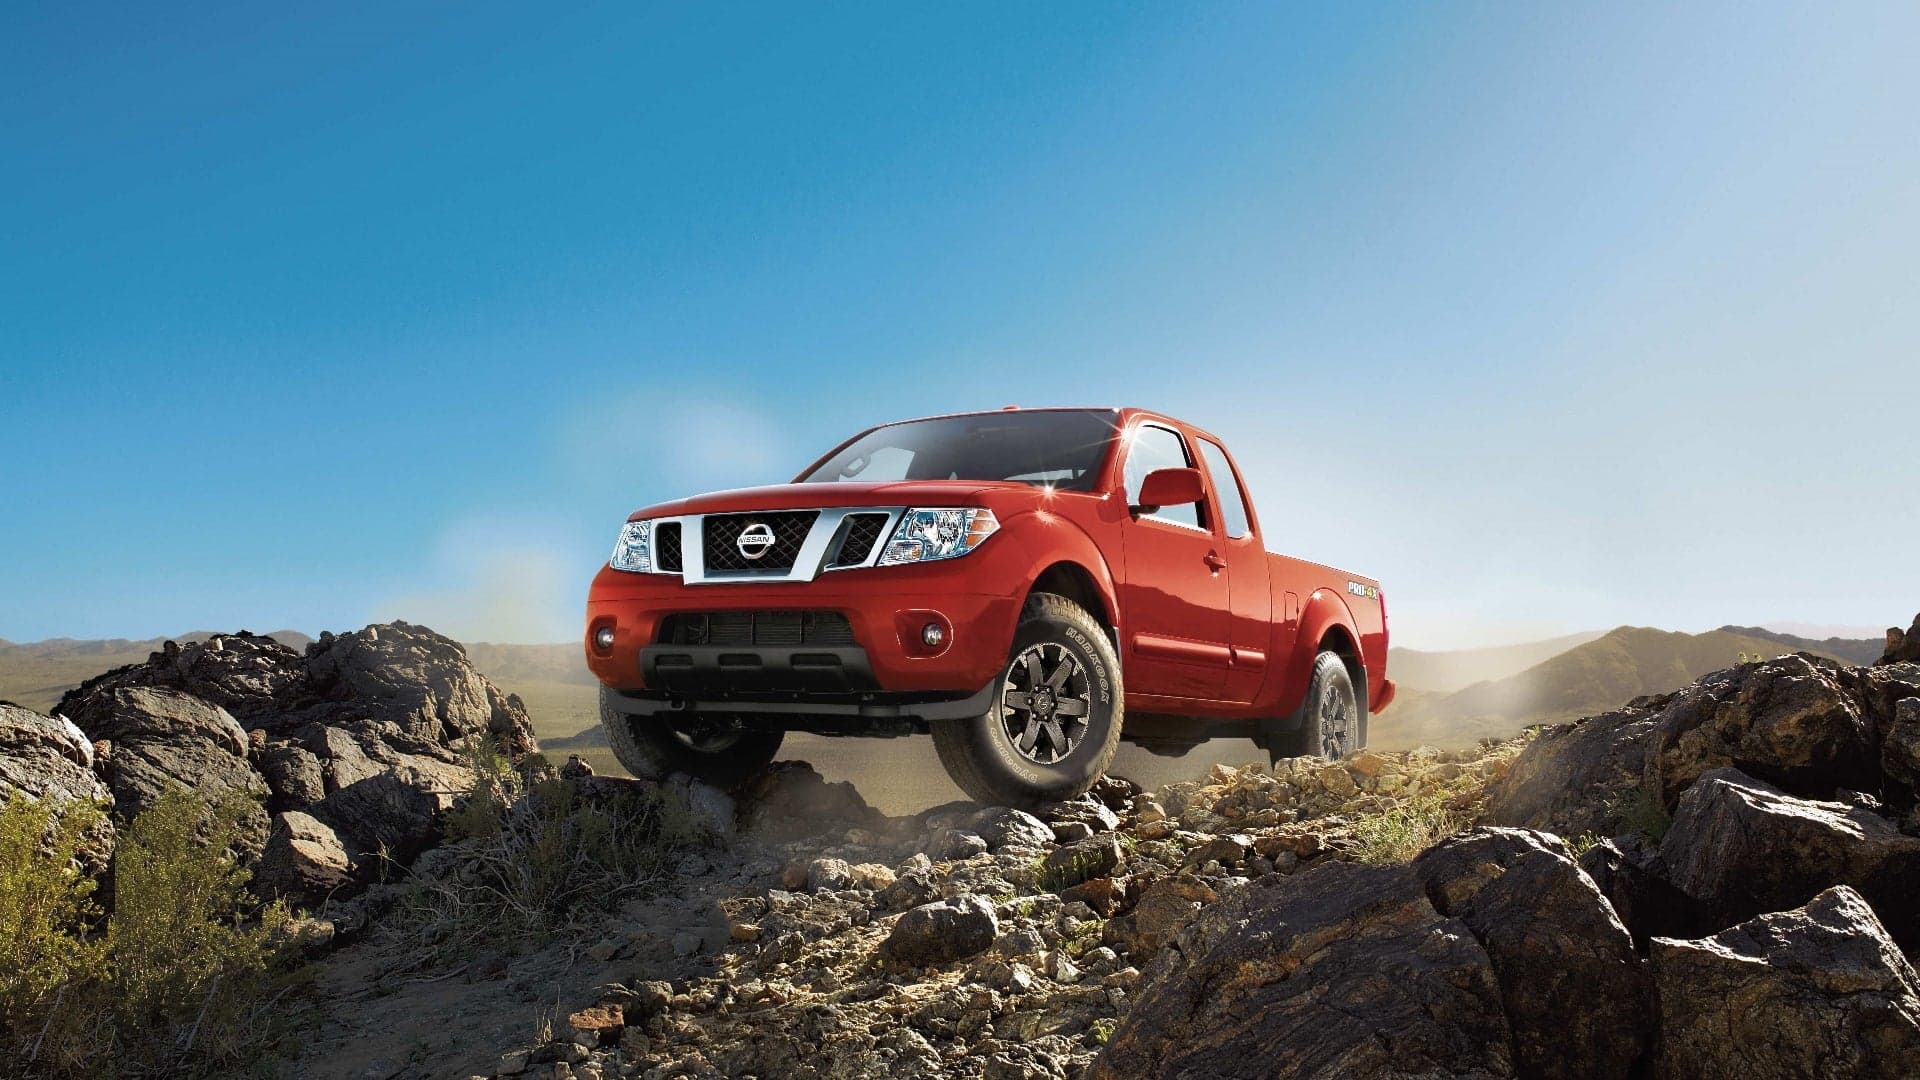 Base 2020 Nissan Frontier Price Jumps by $7,500, Leaving No New Pickups Under $20K